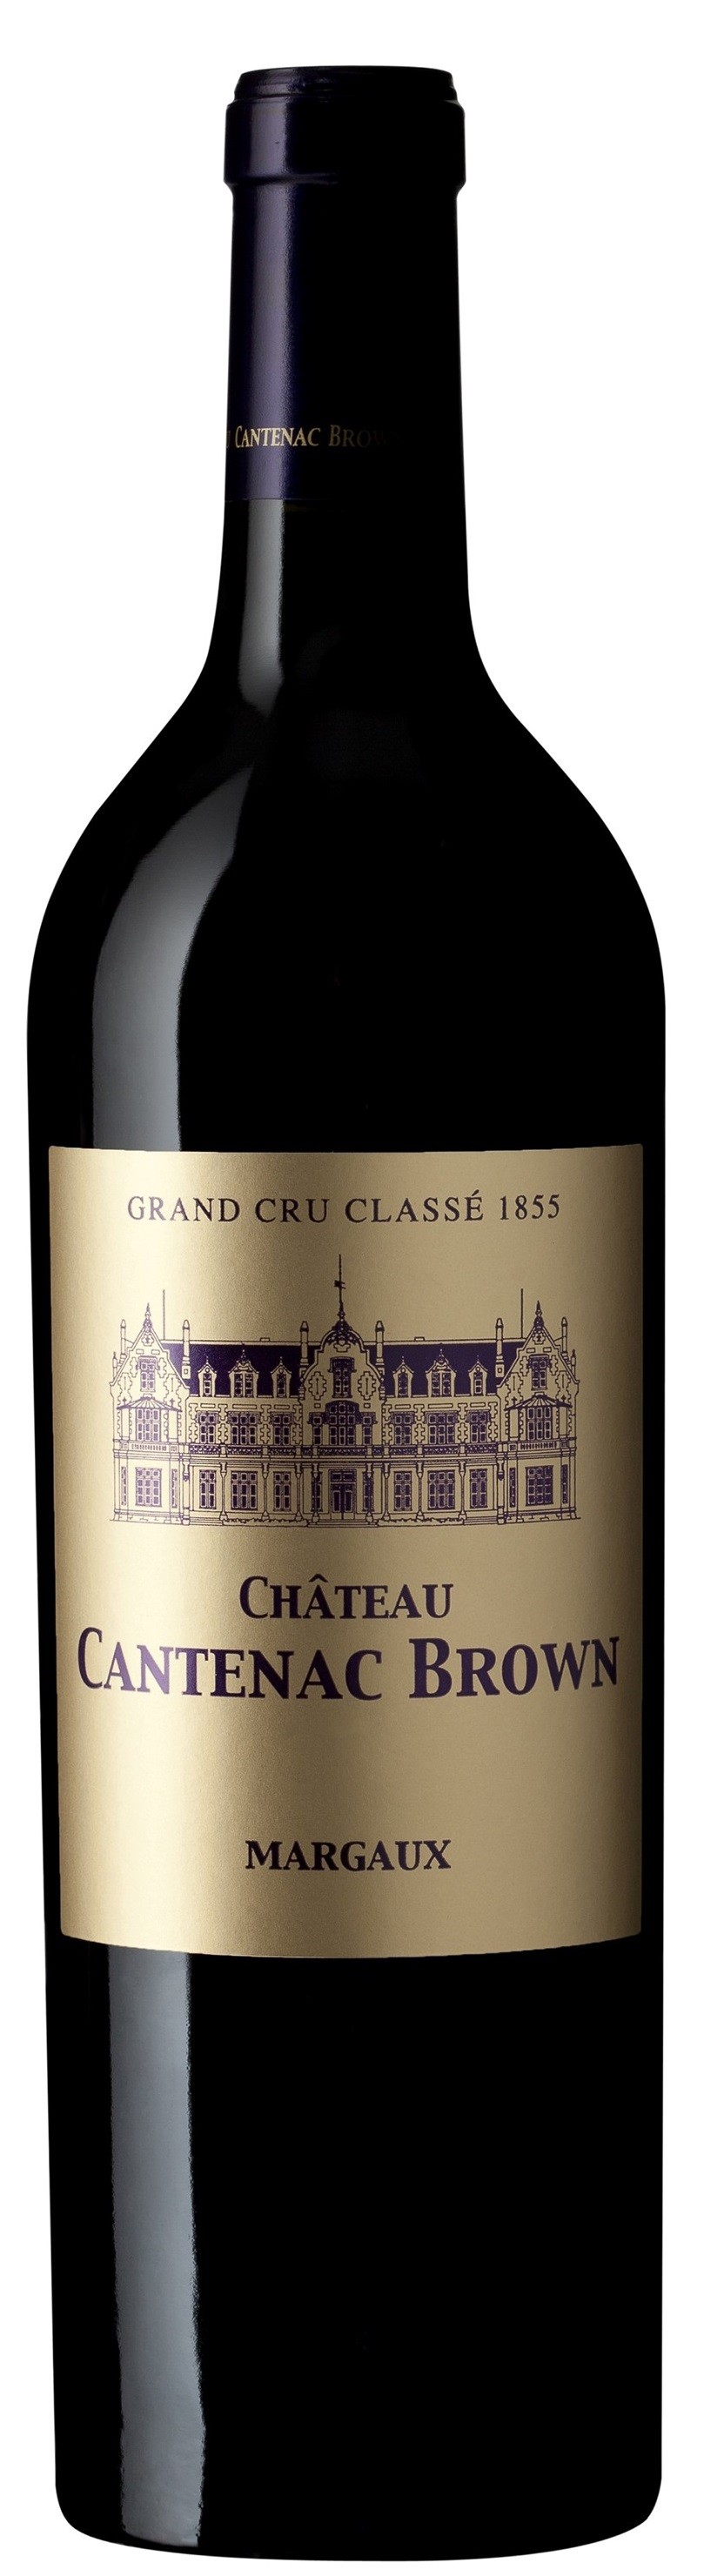 Chateau Cantenac Brown 2017, Margaux